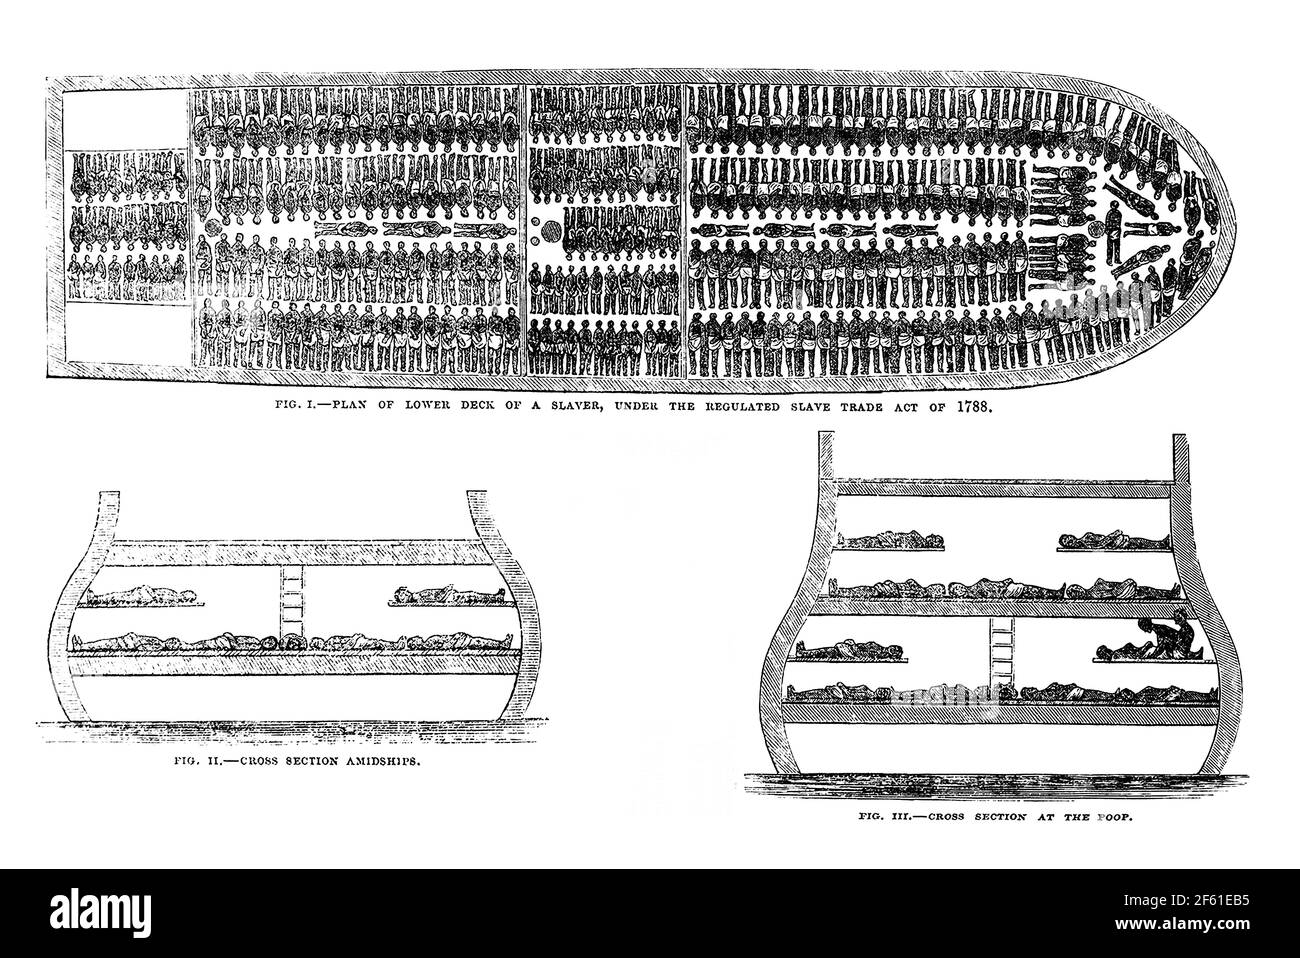 Brookes Slave Ship, Regulated Slave Trade Act of 1788 Stock Photo